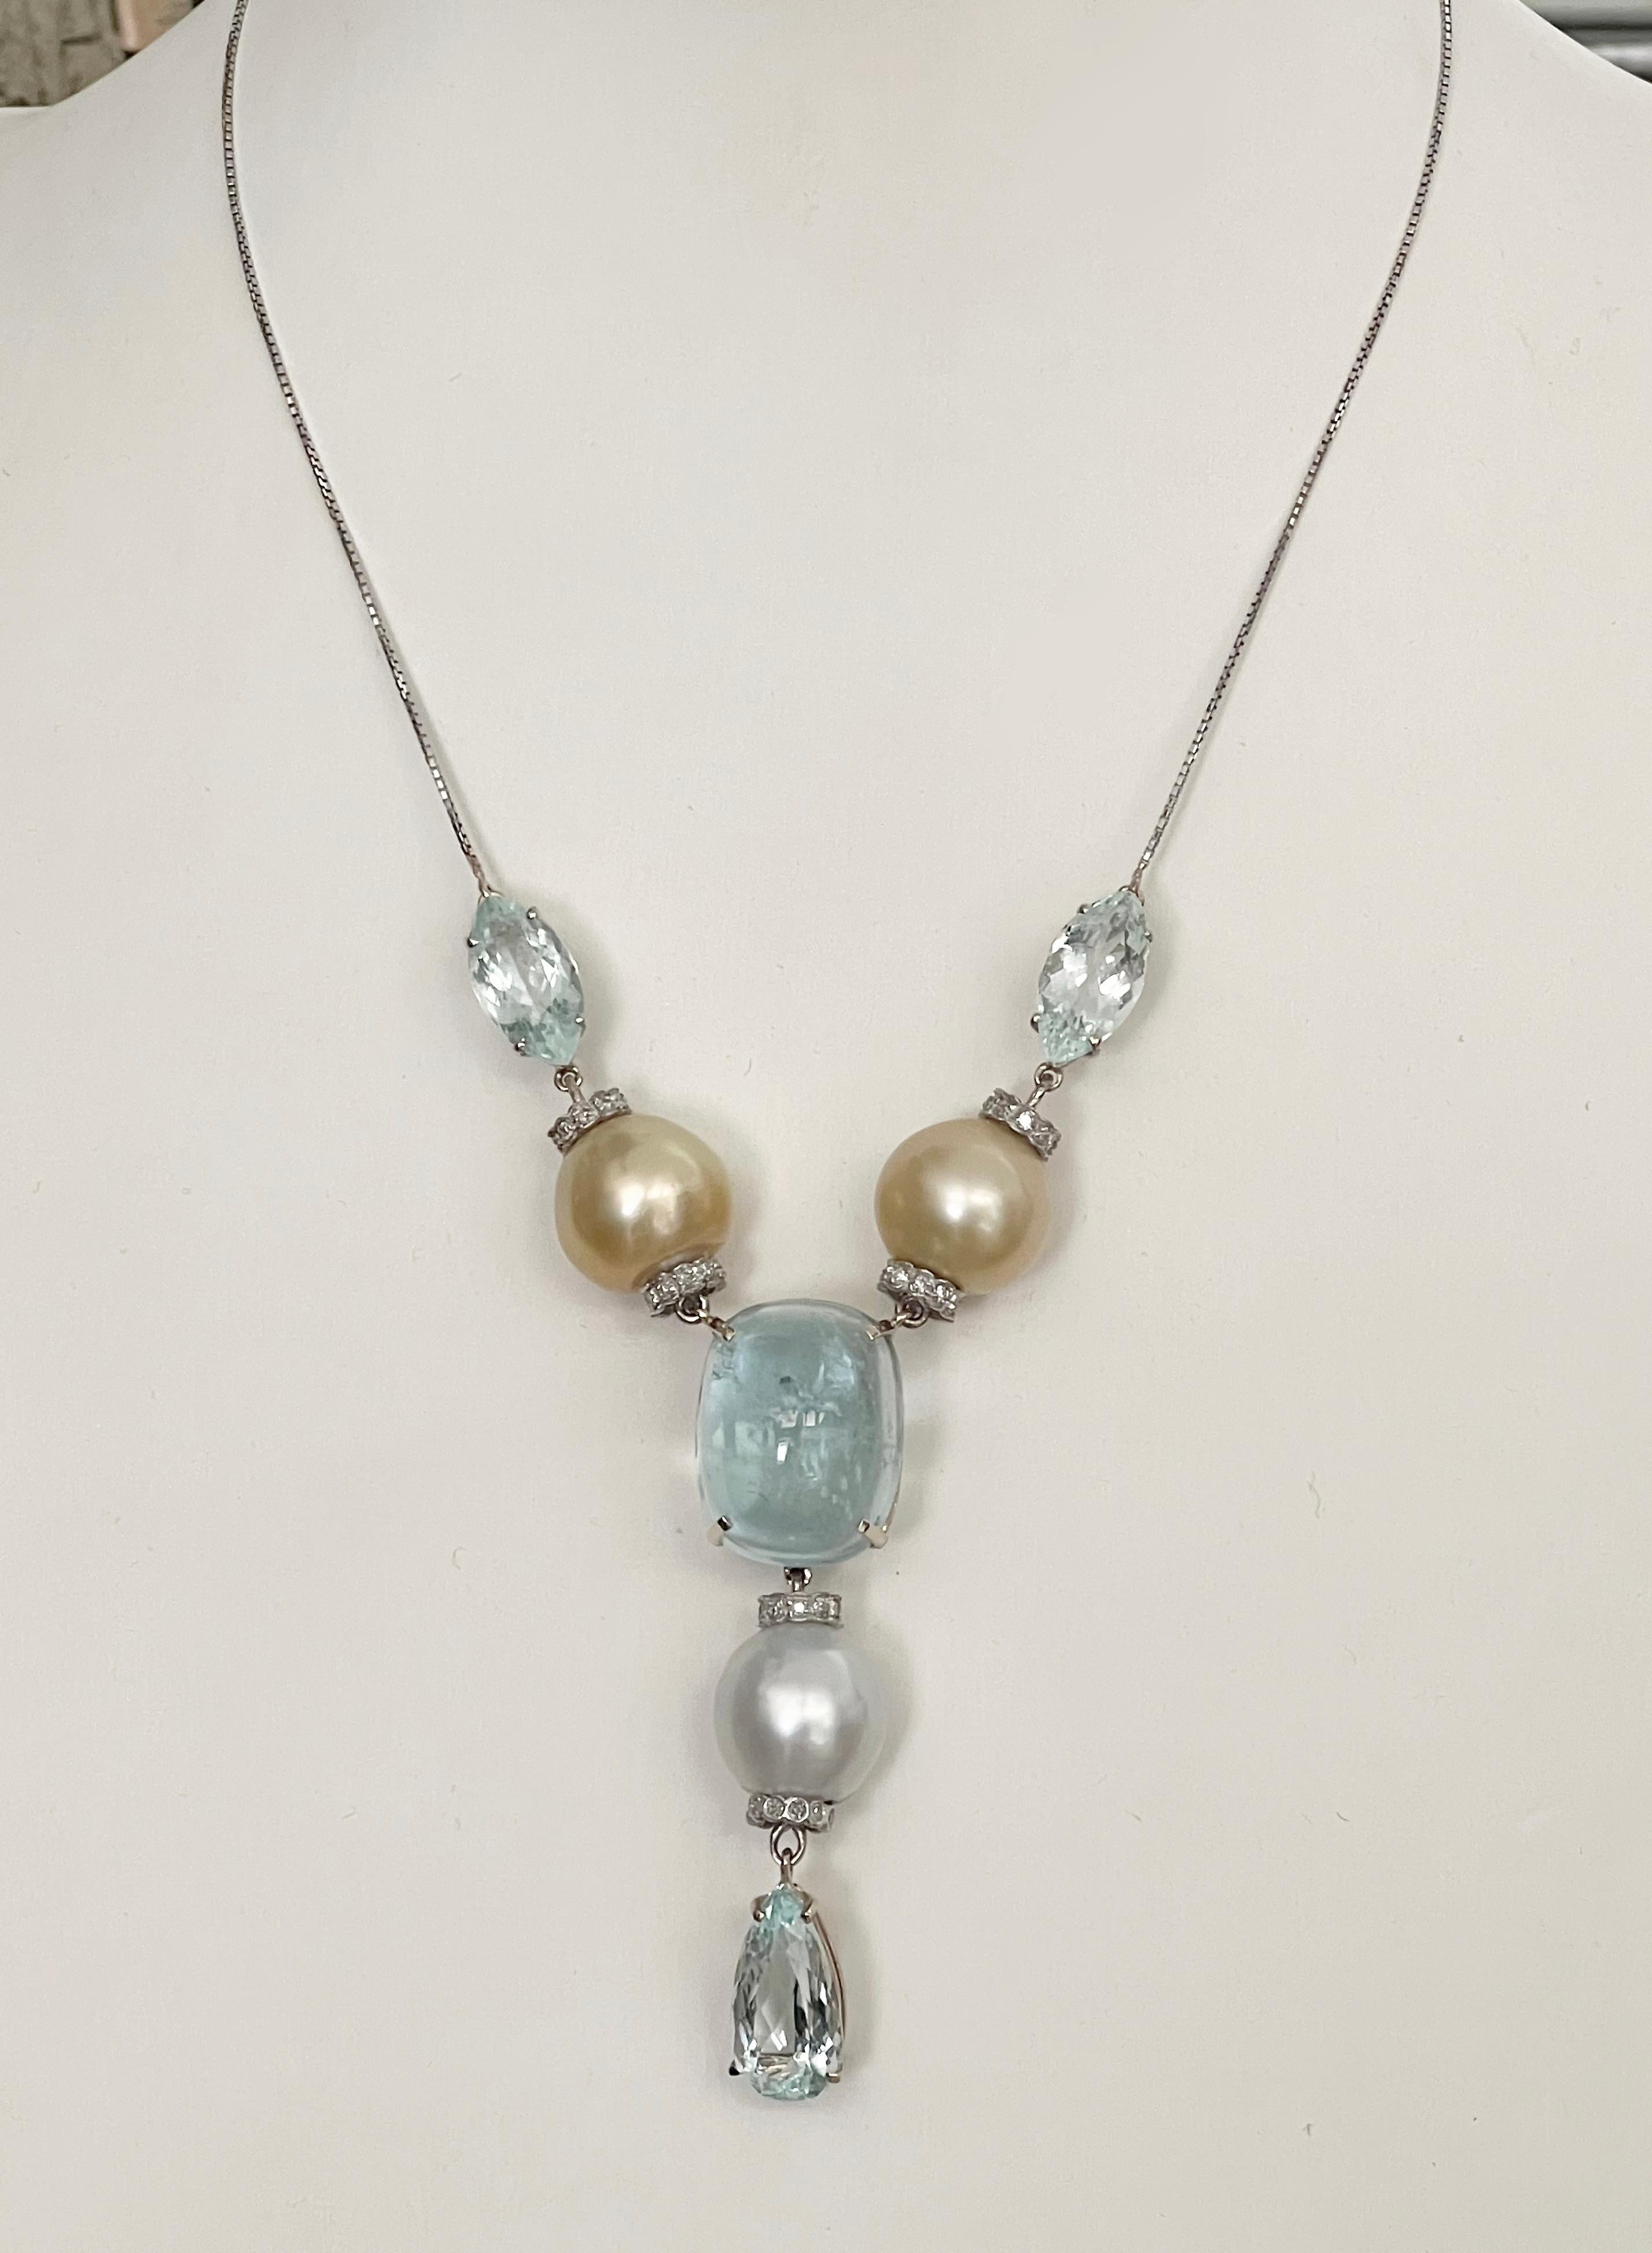 Beautiful 18 karat white gold pendant necklace.Handmade by our craftsmen assembled with diamonds,aquamarine and south sea pearl

Diamonds weight 0.60 karat
Aquamarine weight 41 karat
Necklace total weight 29 grams
Pearls size 13.43 mm
Chain length